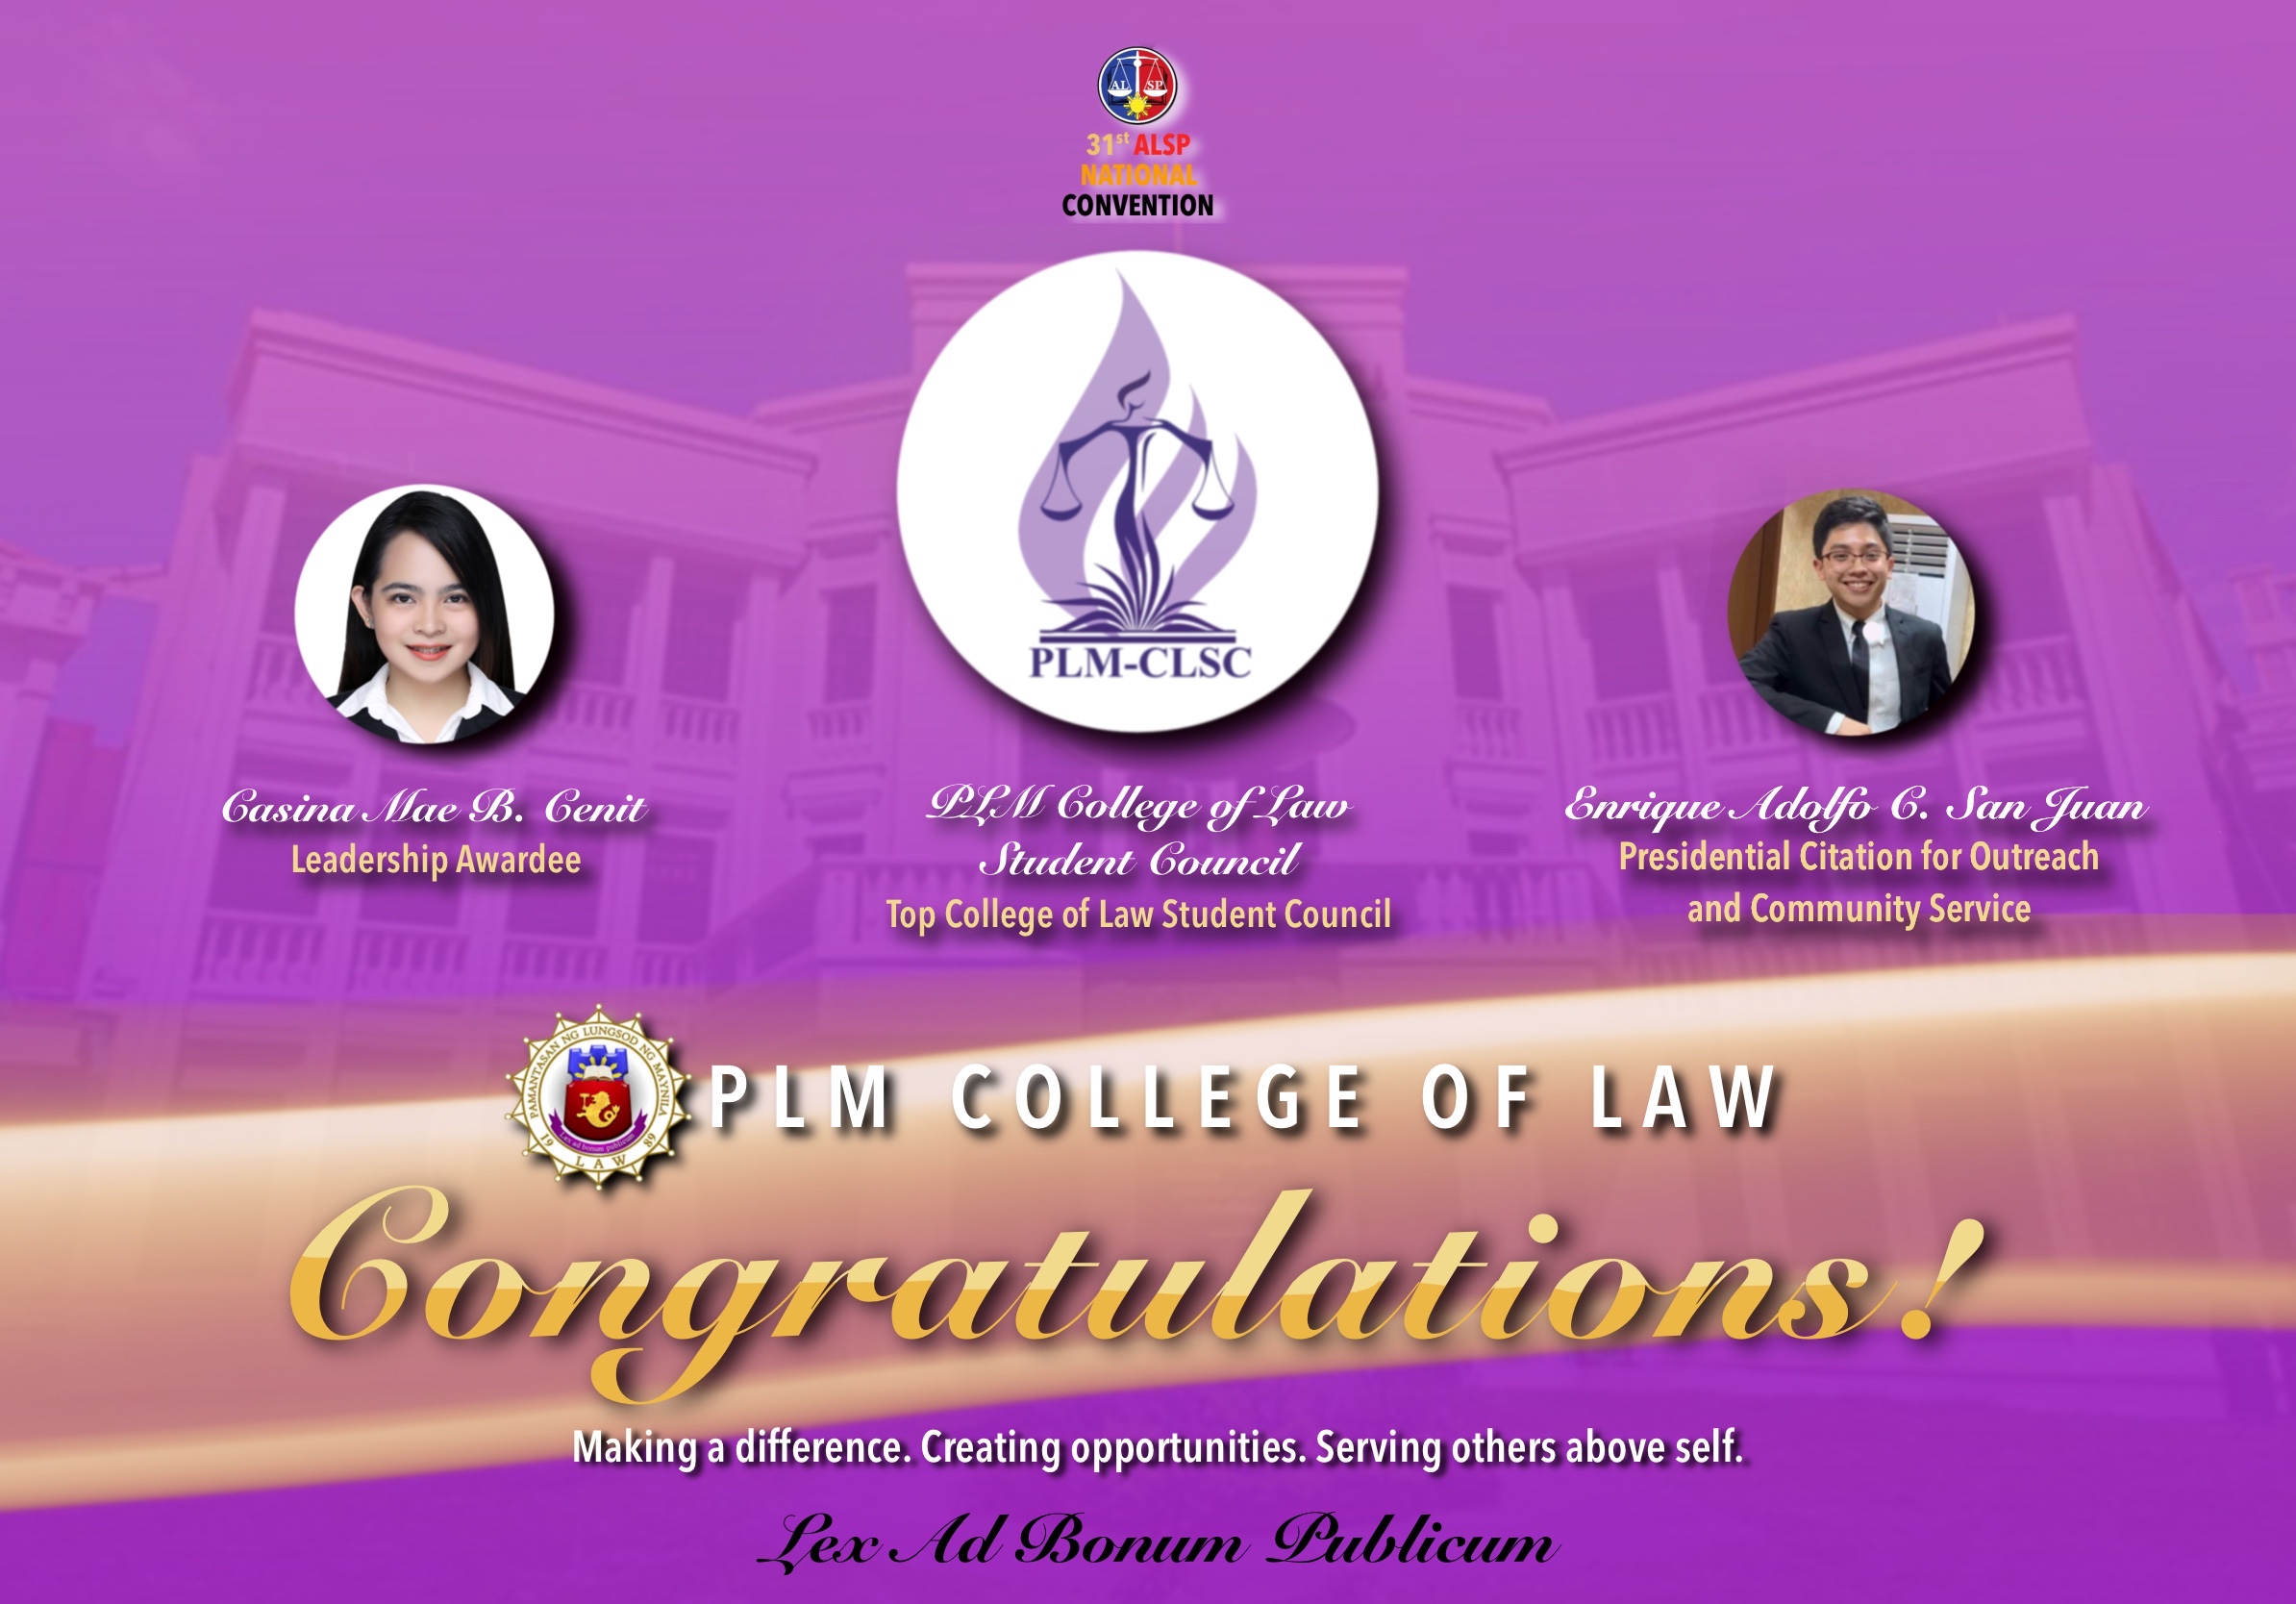 PLM College of Law ALSP 31st Conference